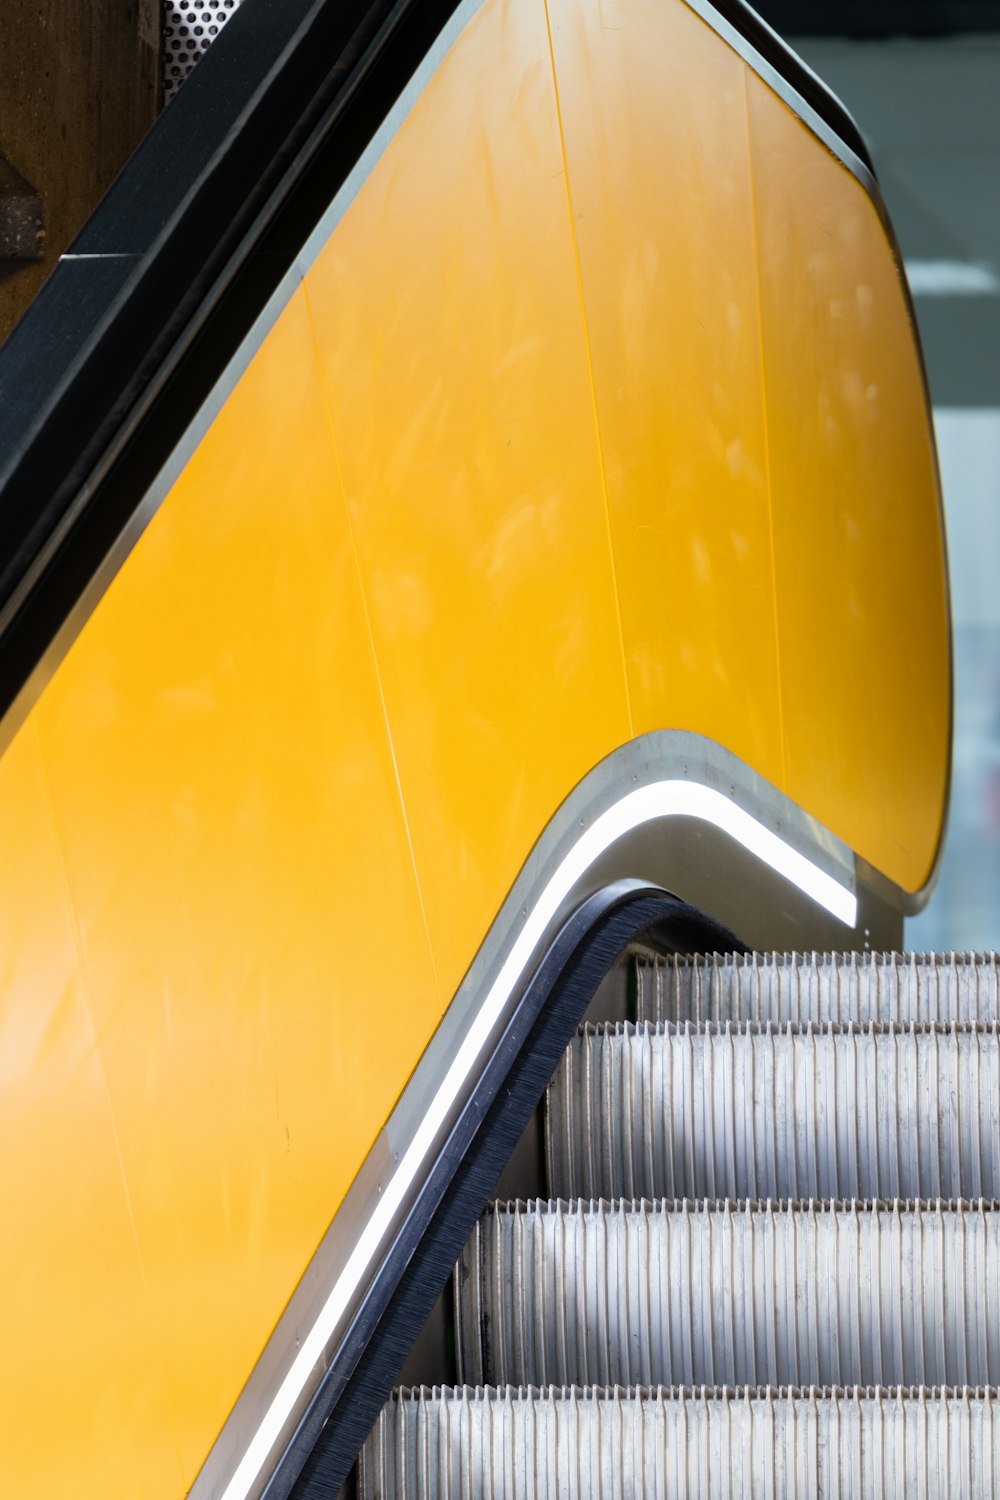 an escalator with a yellow and black color scheme